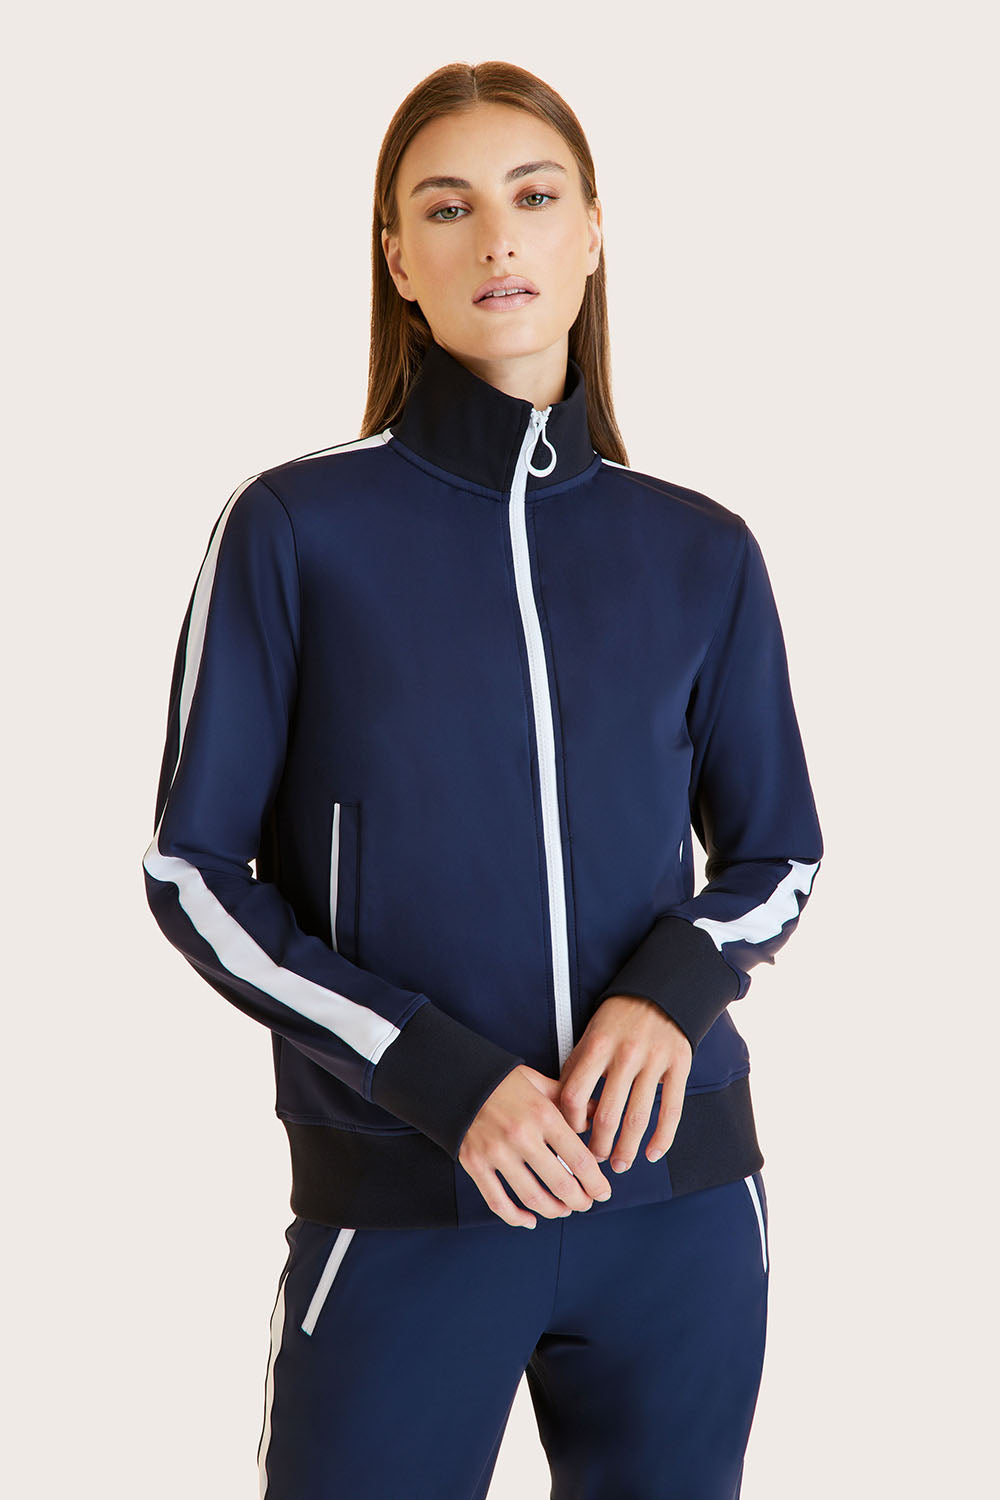 Alala women's track jacket in navy with white stripe